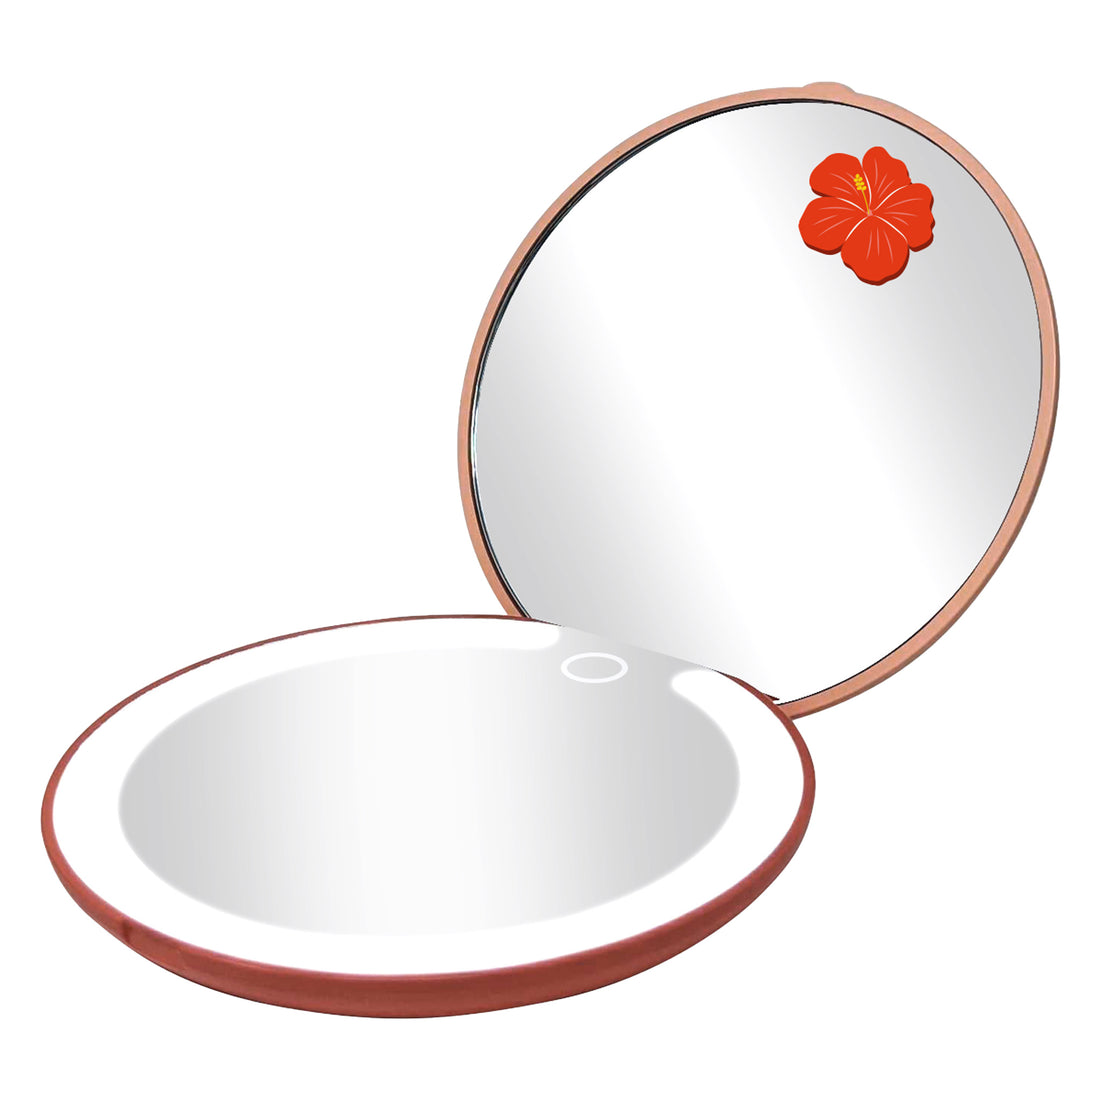 Stitch LED Rechargeable Compact Mirror